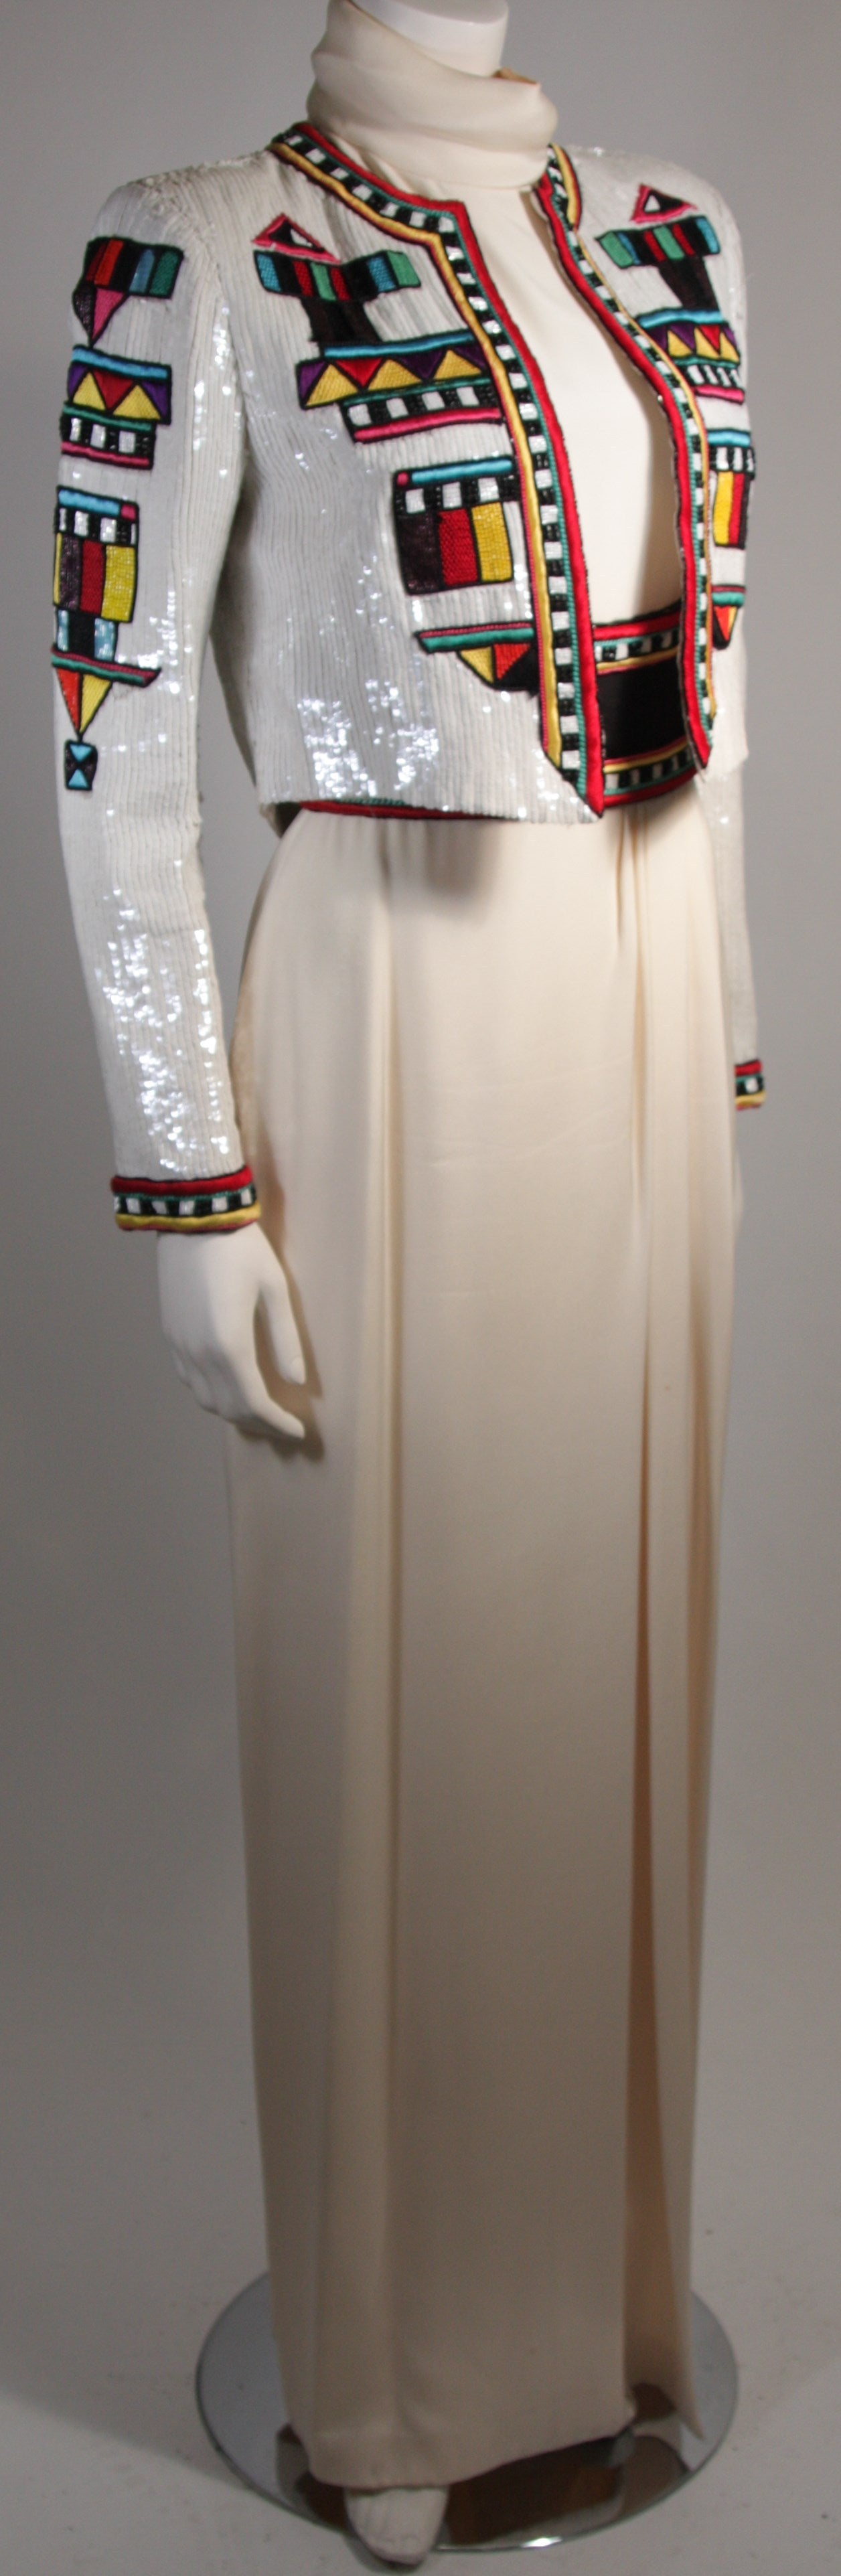 This is a Bob Mackie design. This ensemble features bold colored beading a top a warm Ivory neutral hue. The fully sequined evening jacket is heavily beaded with an ethnic pattern. The futurism style dress features a striking beaded waist detail and